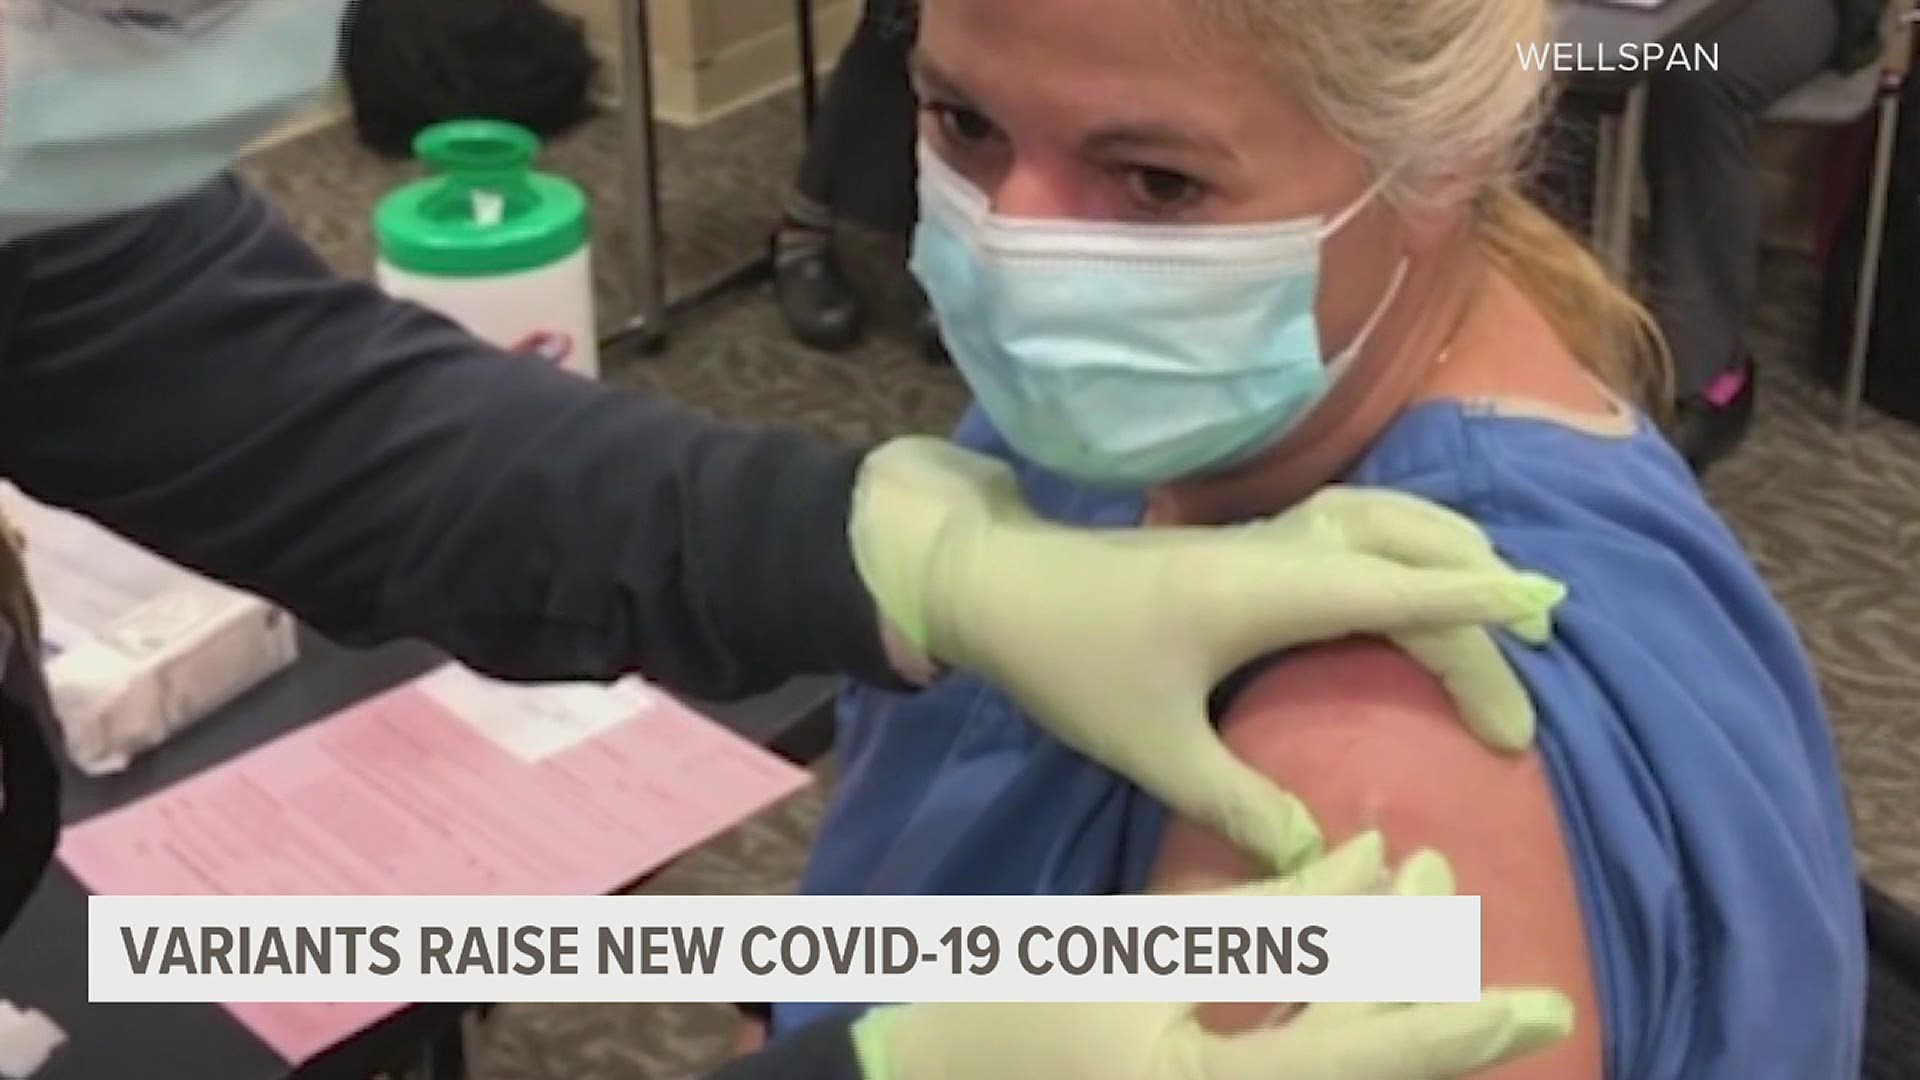 "We can prevent this from happening in PA if we do the right thing," said one doctor, as other states see spike in COVID-19 cases due to contagious variants.